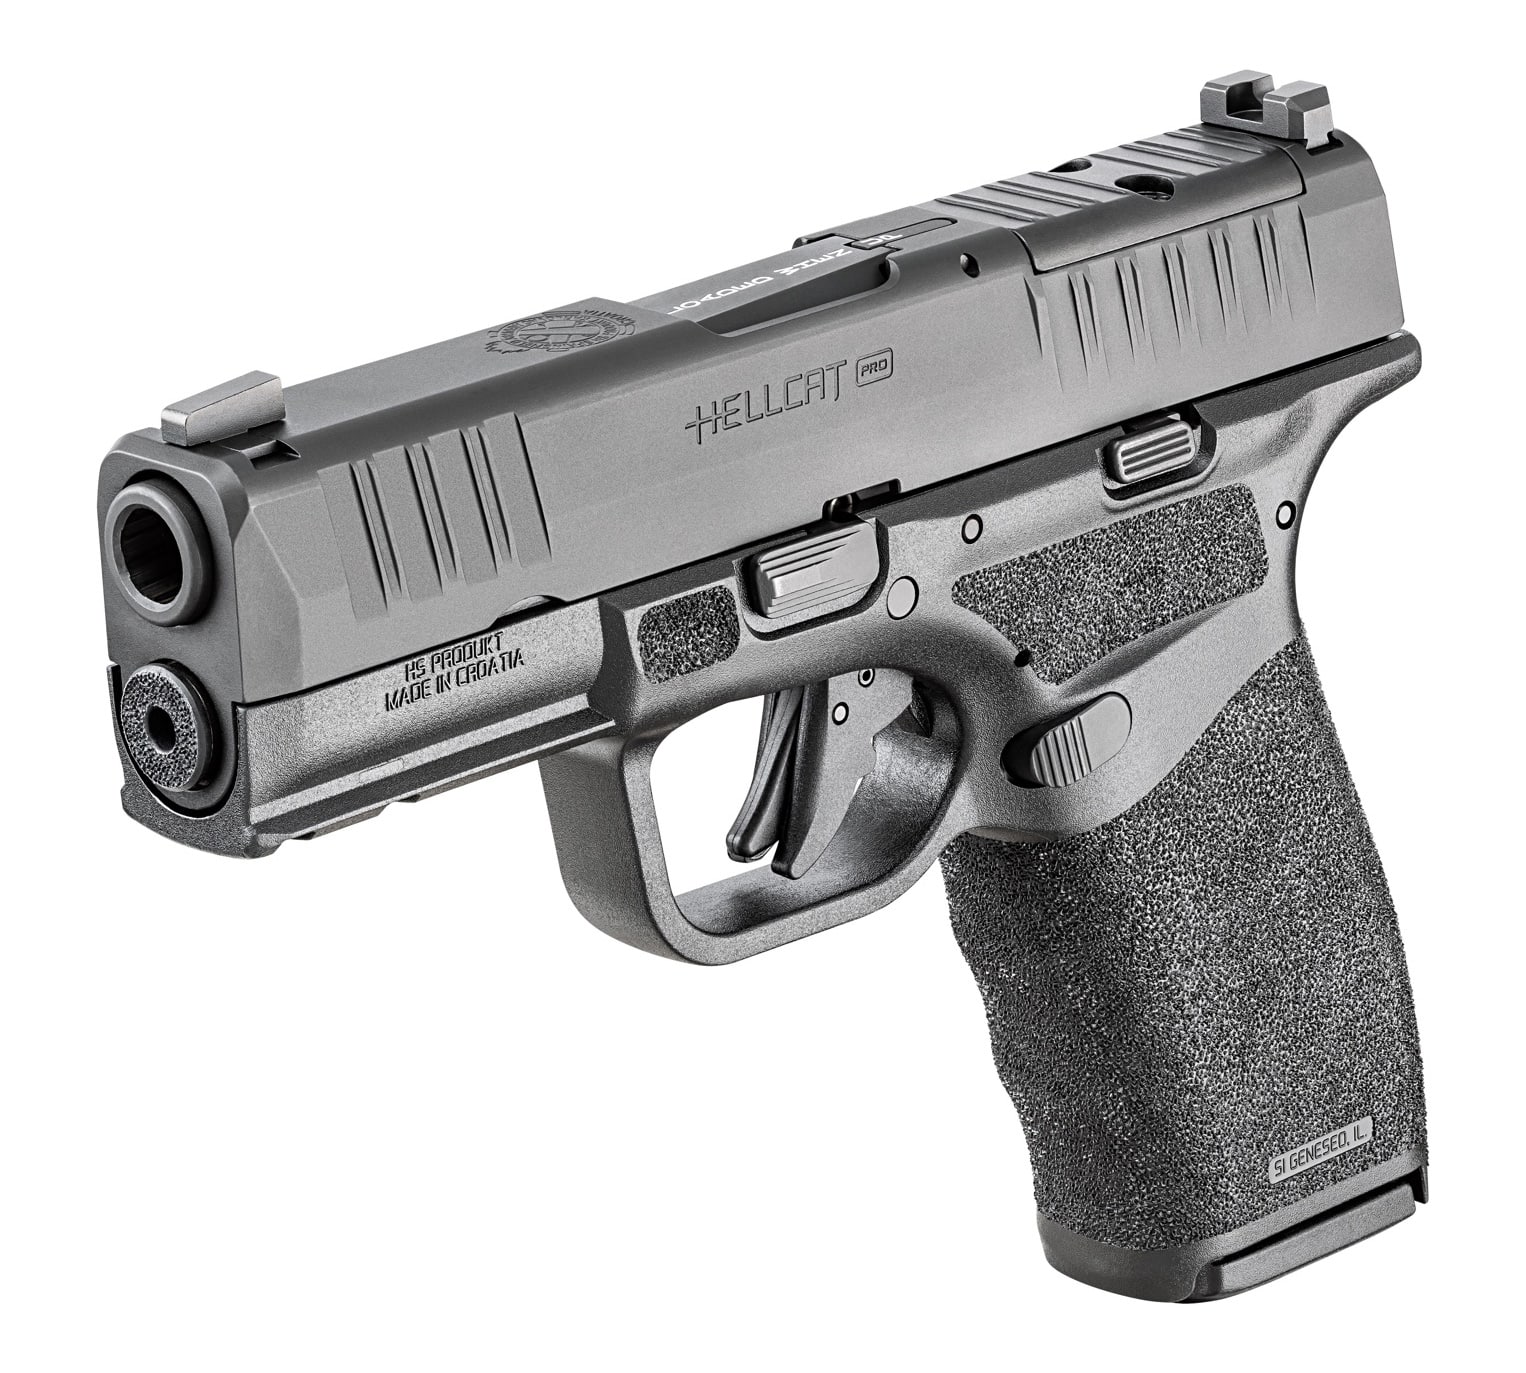 Shown in this photograph is a Springfield Armory Hellcat Pro that is now on the list of CA legal handguns. The additional barrel length and grip length give the gun an improved firing grip plus improved accuracy and reduced muzzle flip. When compared to a Smith and Wesson revolver, this gun has better sights, capacity and handling characteristics. It goes without saying that it is vastly superior to any single shot pistol that the California Title 11 would seem to want to force on people.